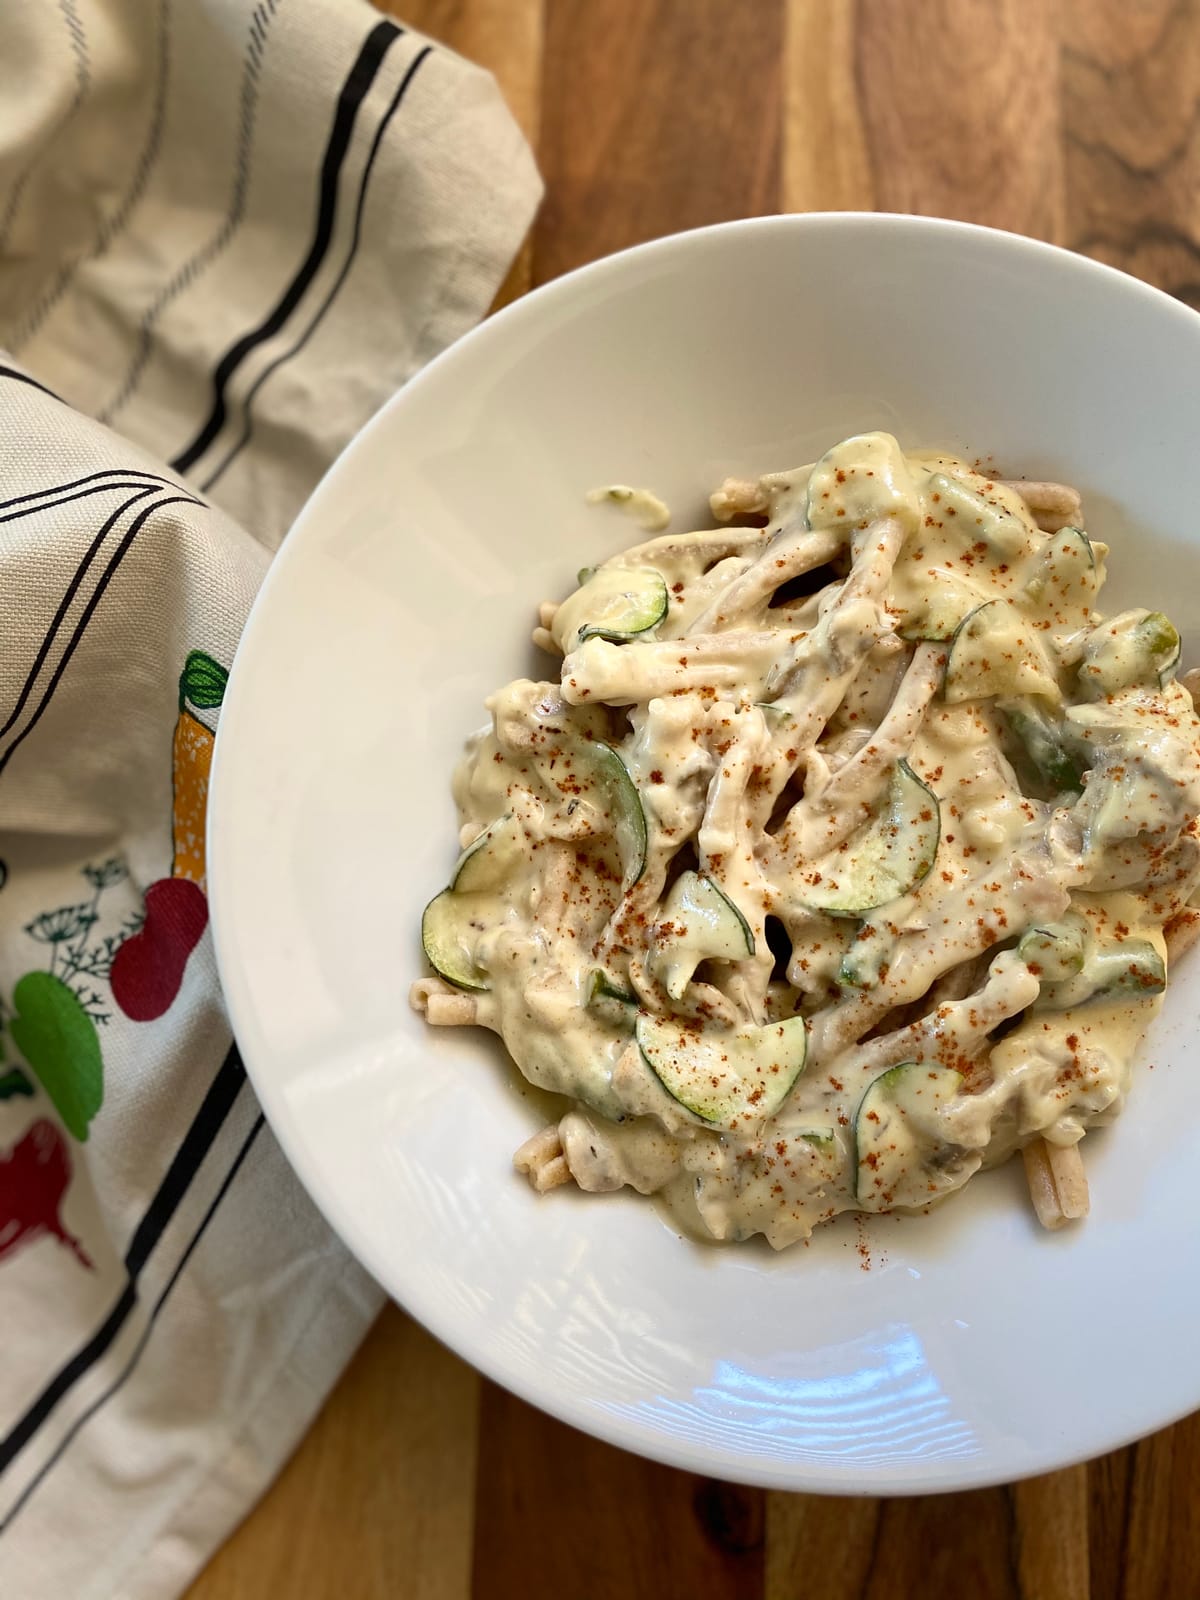 Creamy Dreamy Pasta with Asparagus, Zucchini and Mushrooms